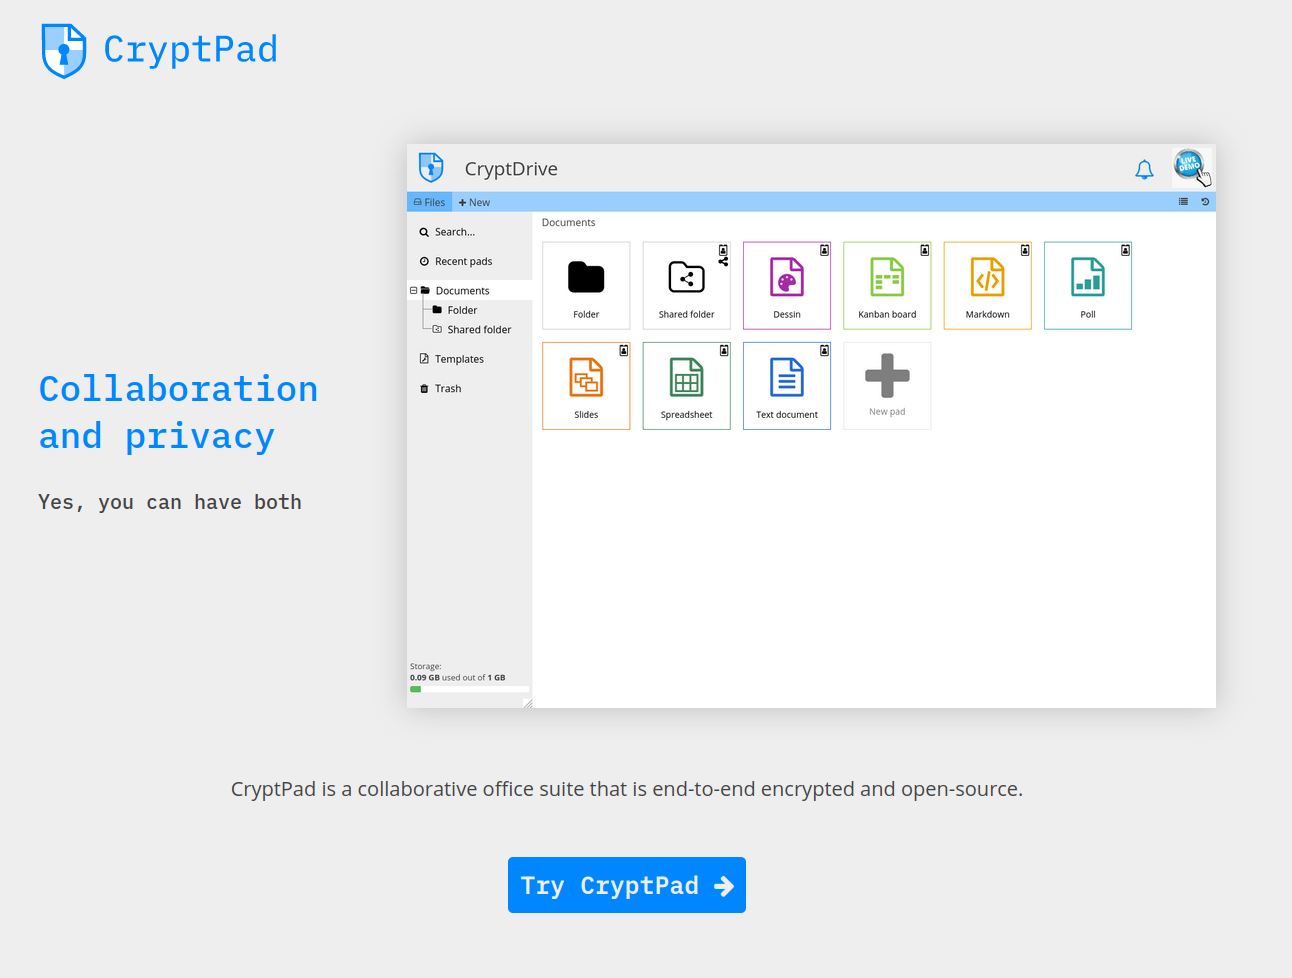 Screenshot of the updated project site. Clicking "Try CryptPad" takes visitors to the public instance list